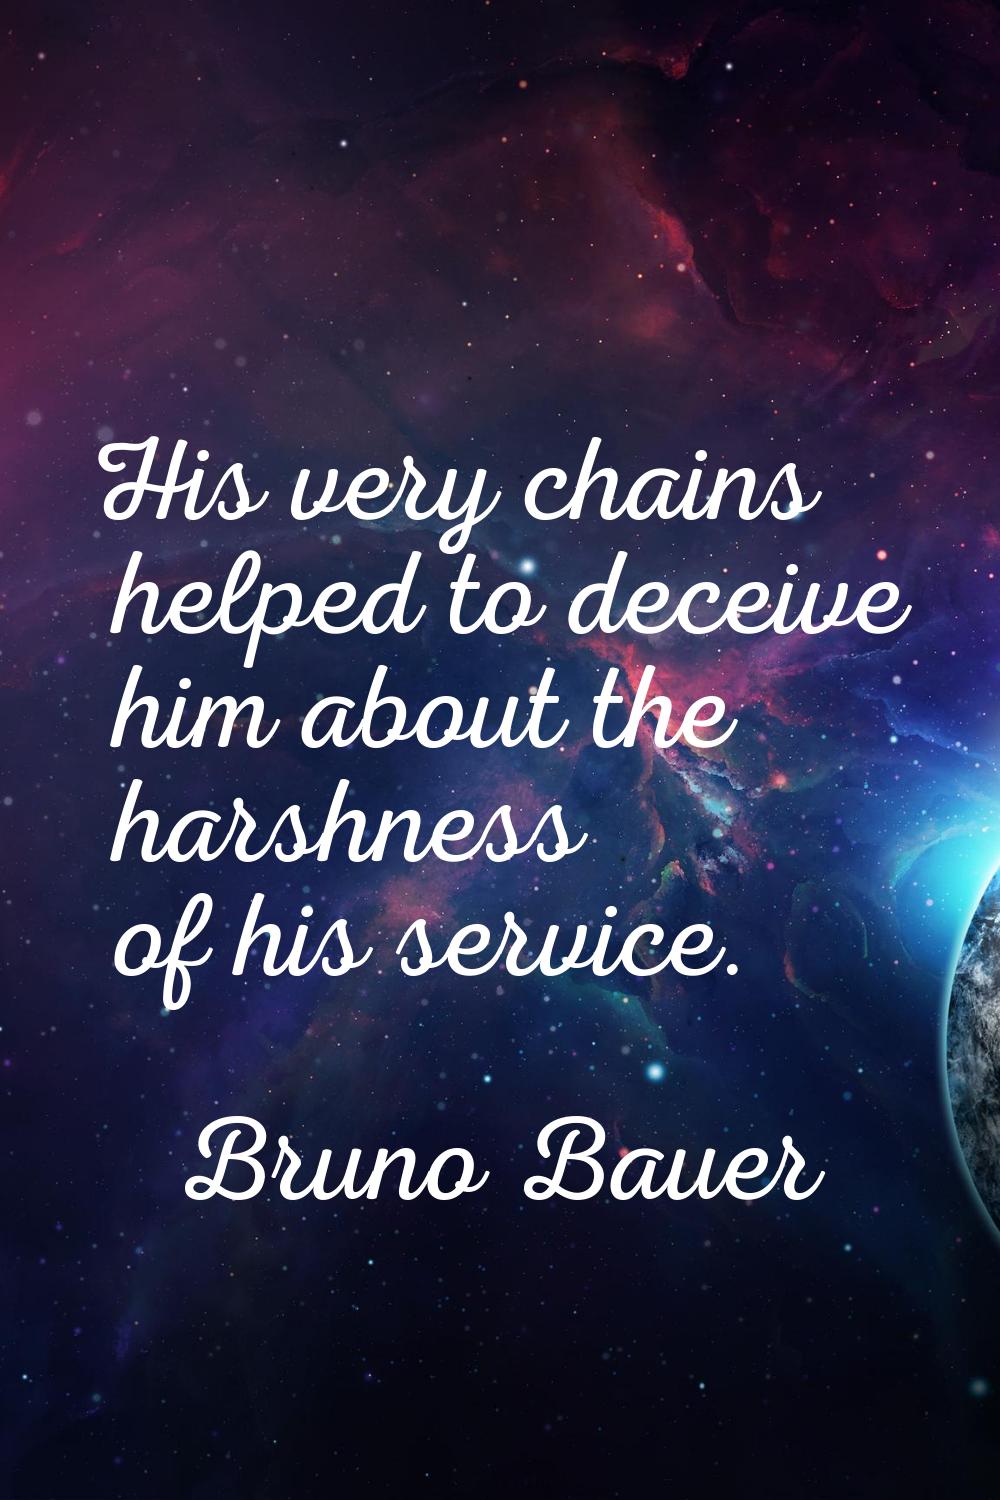 His very chains helped to deceive him about the harshness of his service.